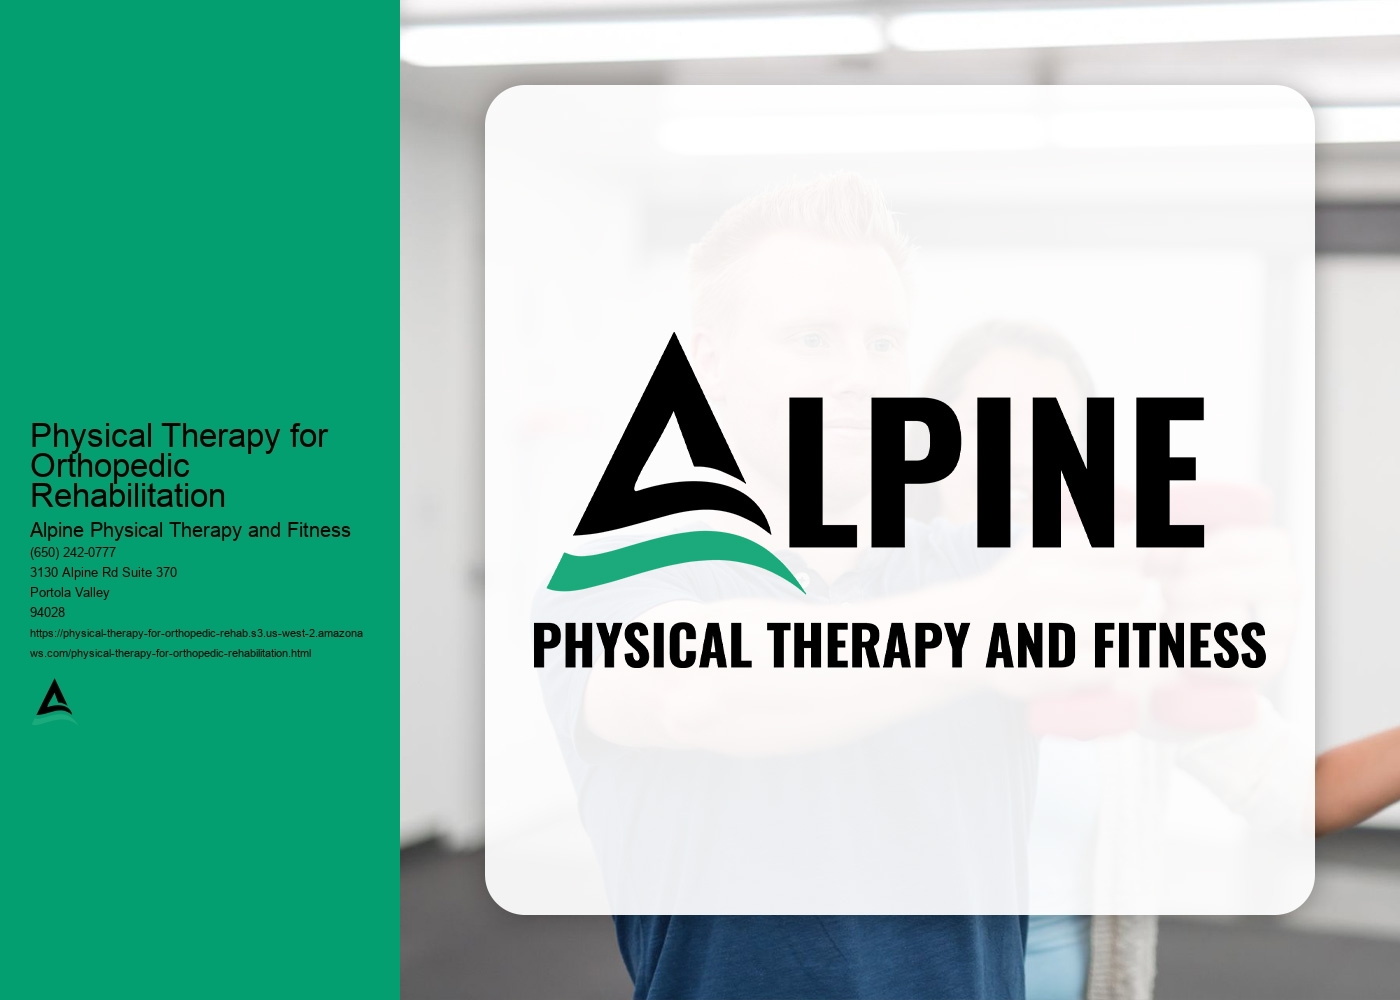 How can a patient find a qualified physical therapist specializing in orthopedic rehabilitation?